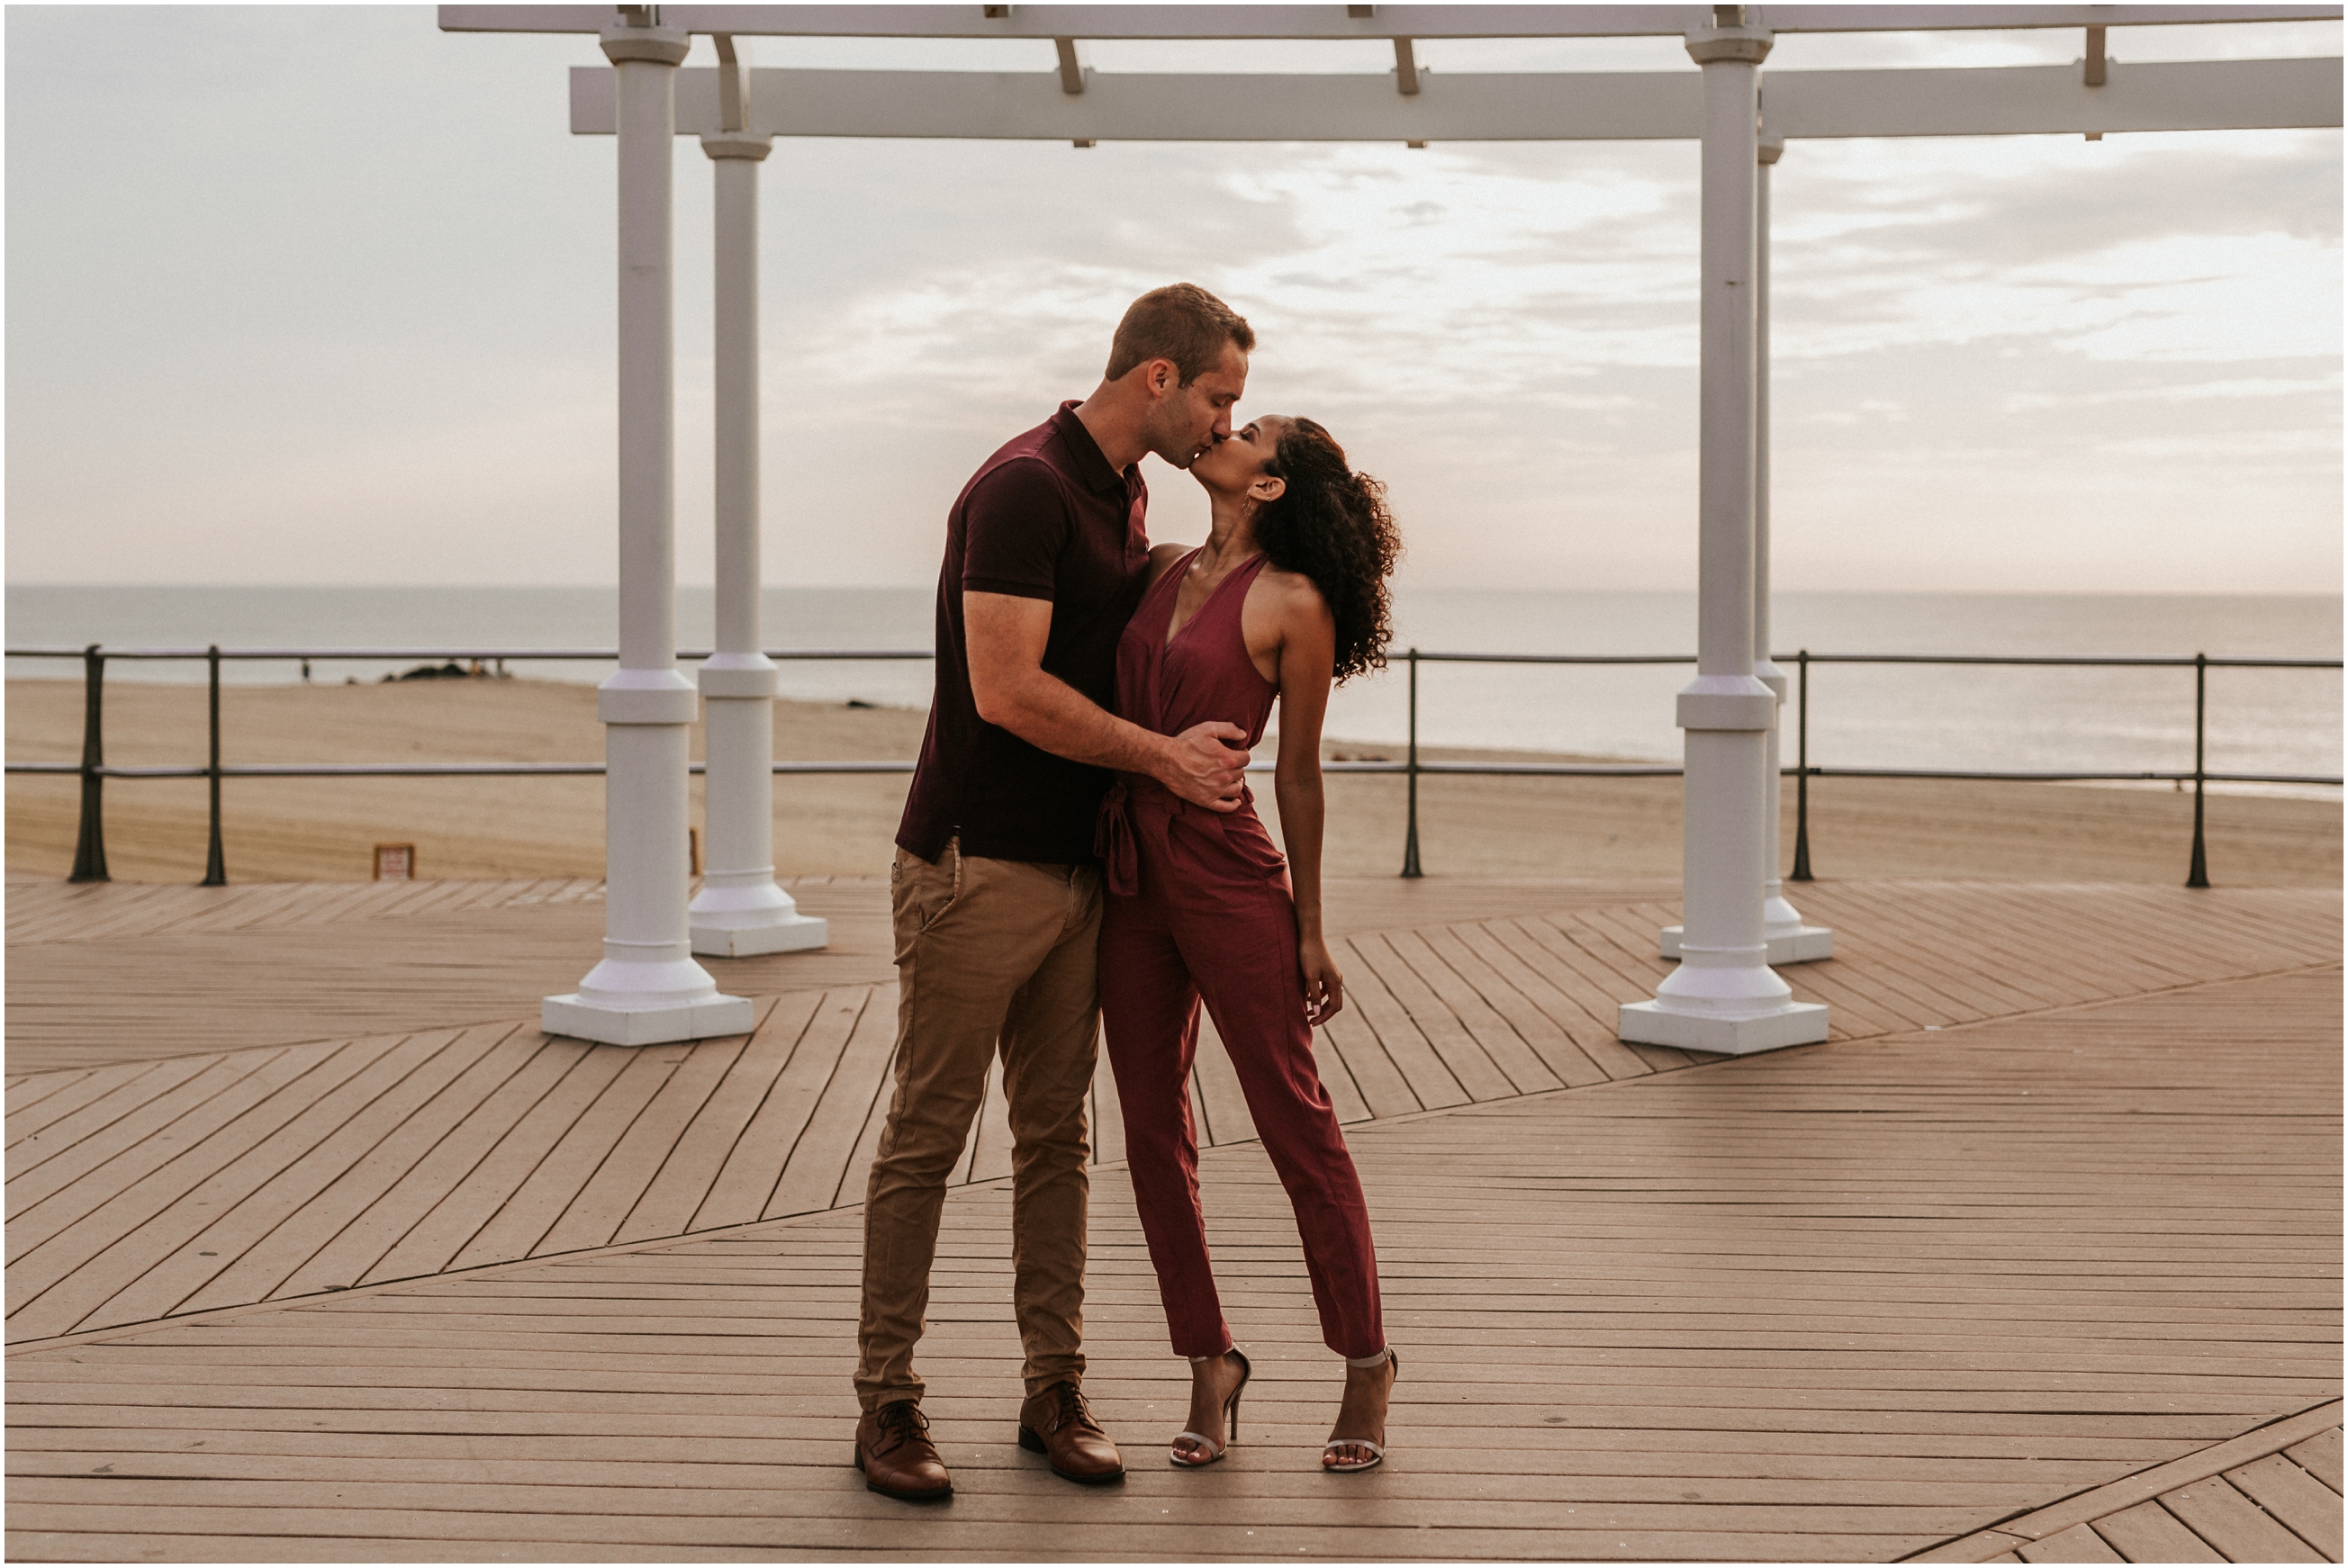 Long Branch Beach Monmouth University New Jersey Summer August Engagement Session NJ Photographer